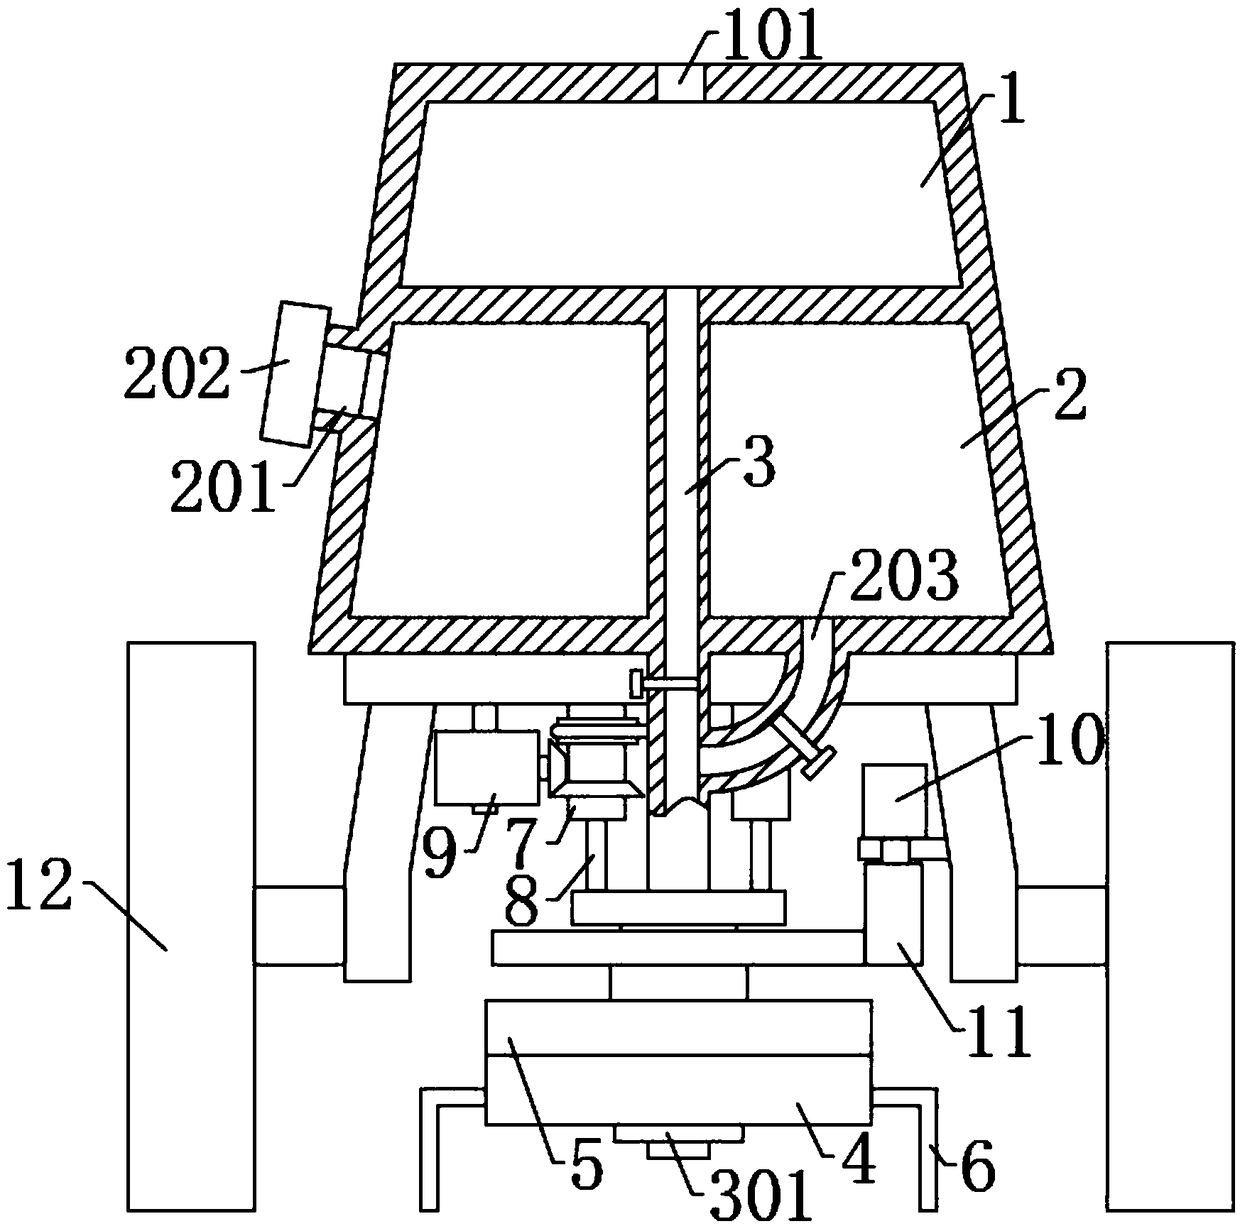 Sowing and earth-covering apparatus for vegetable plantation